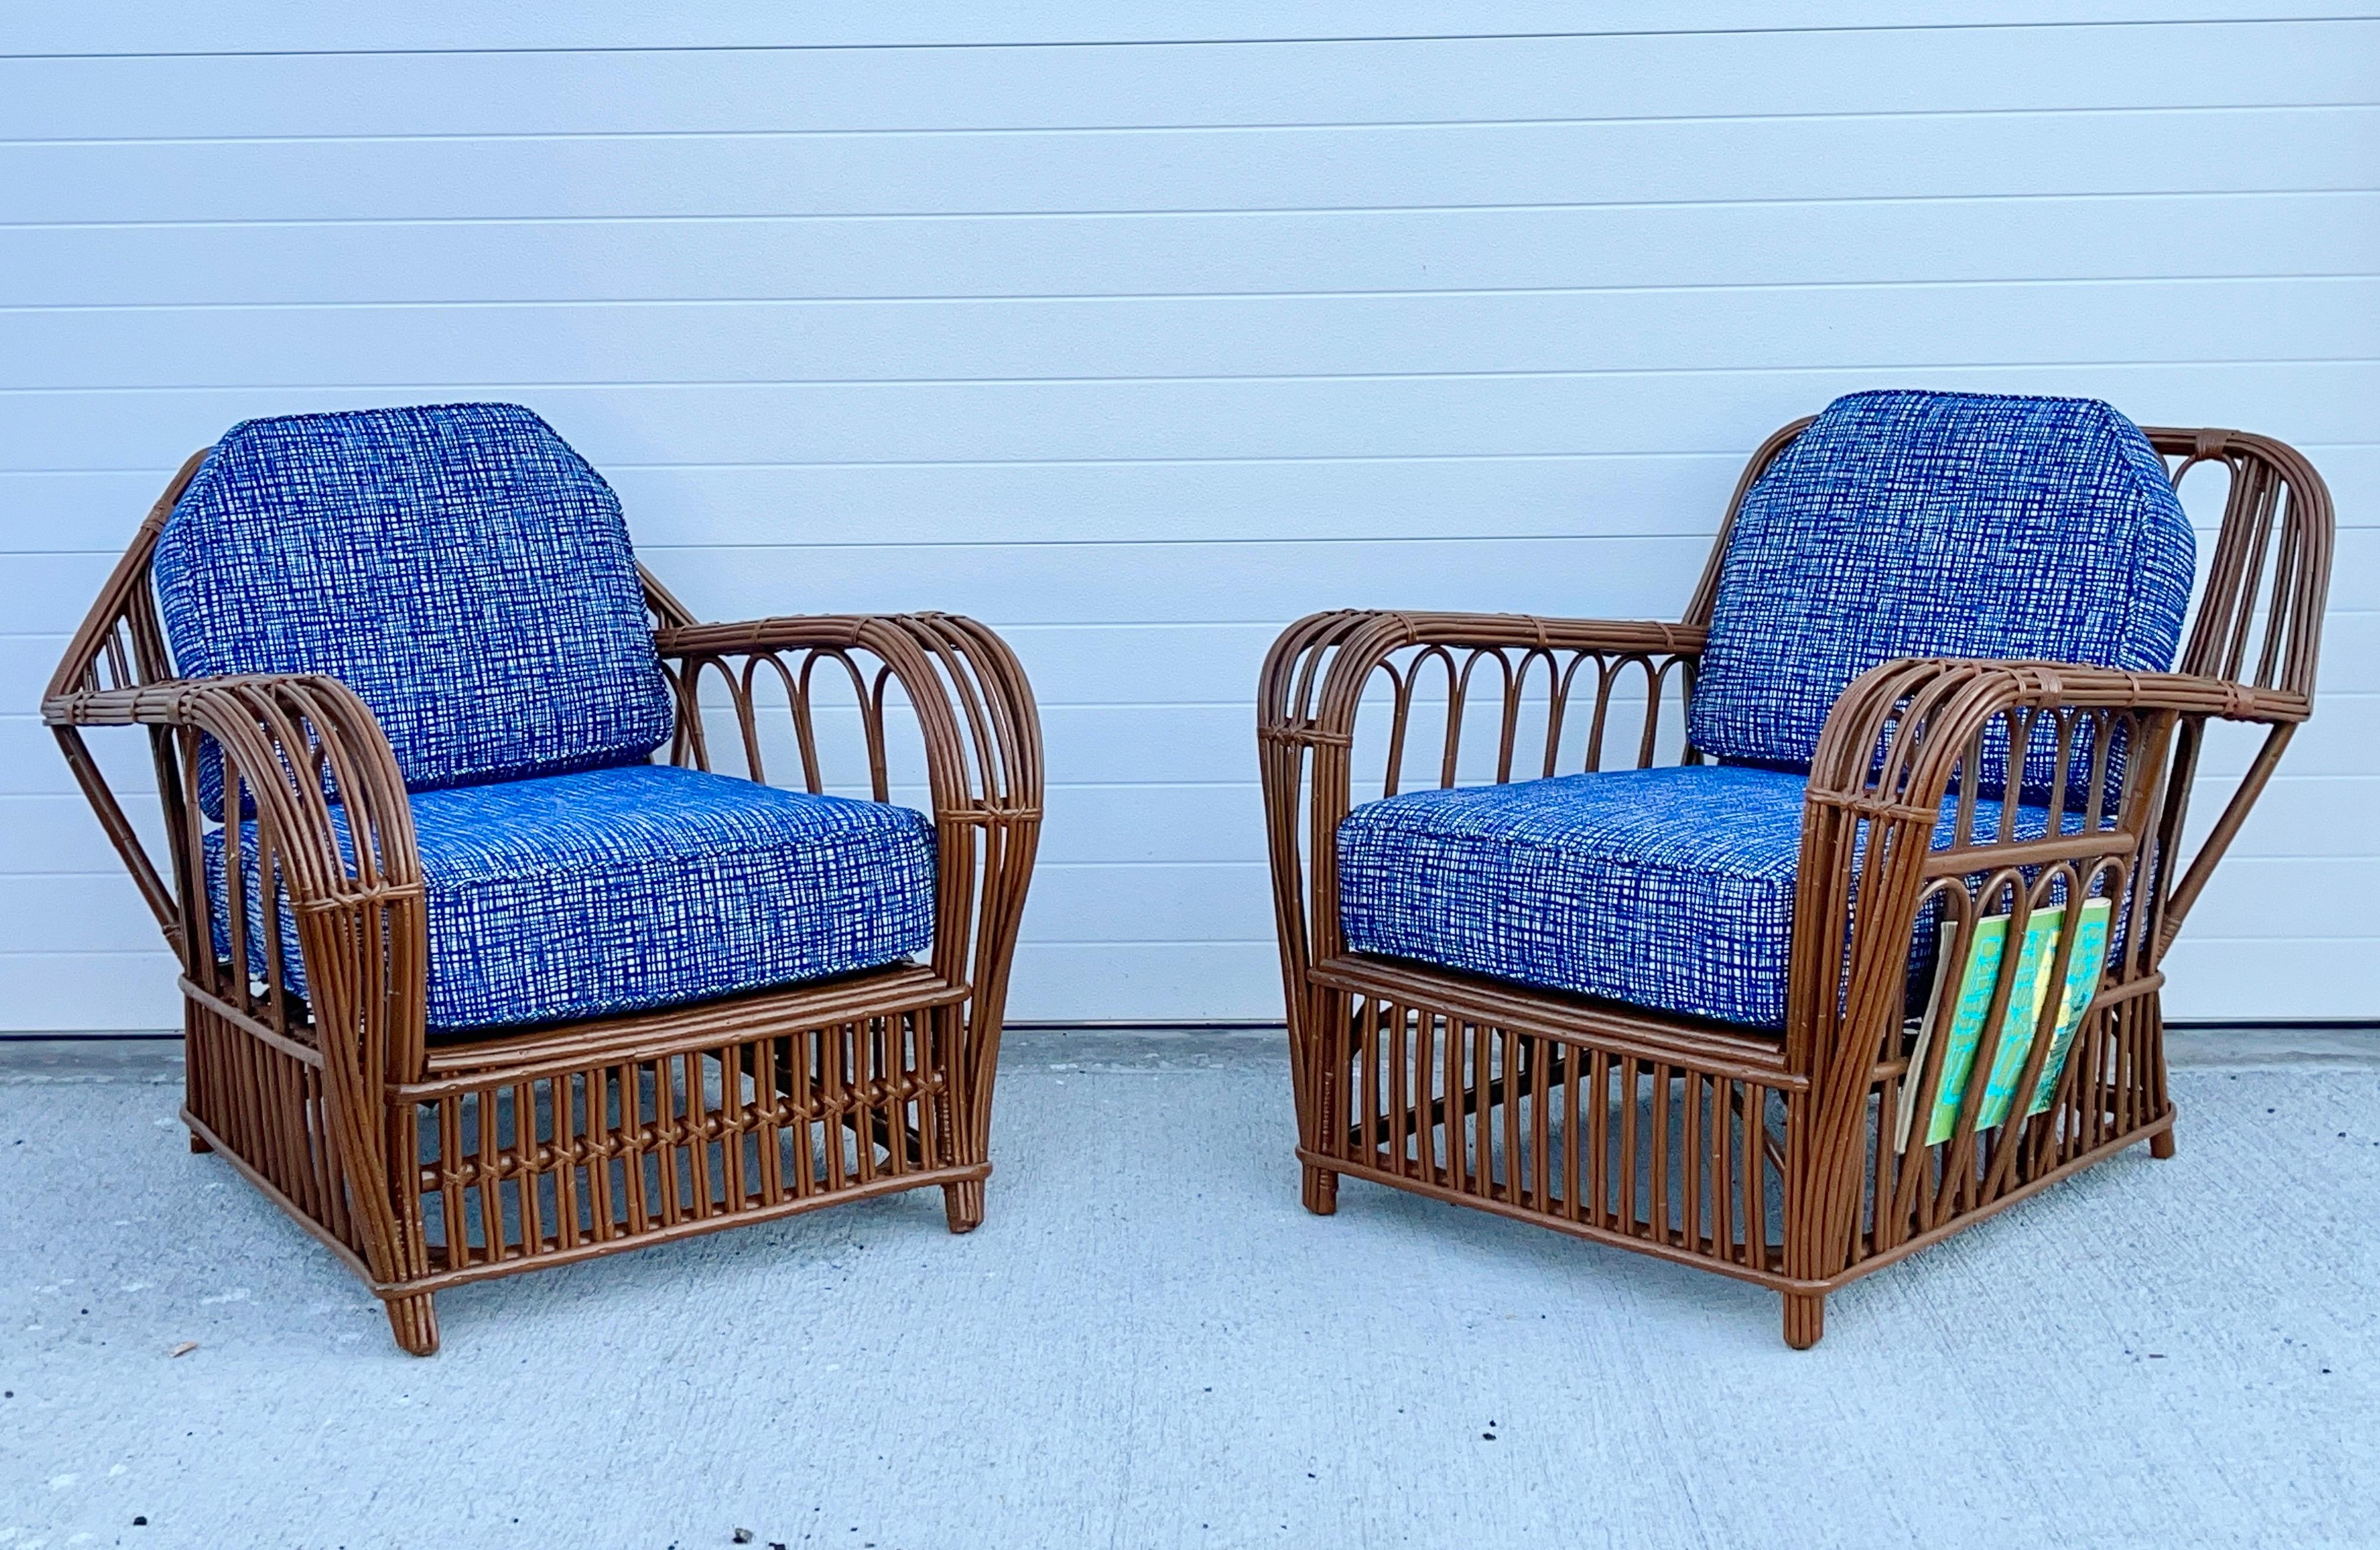 Set of two American art deco stick reed rattan armchairs.  One with tombstone back.  One with square (rectangular) back; this one also has a side pocket for newspapers and Country Life.
Both newly restored, refinished and new custom cushions in